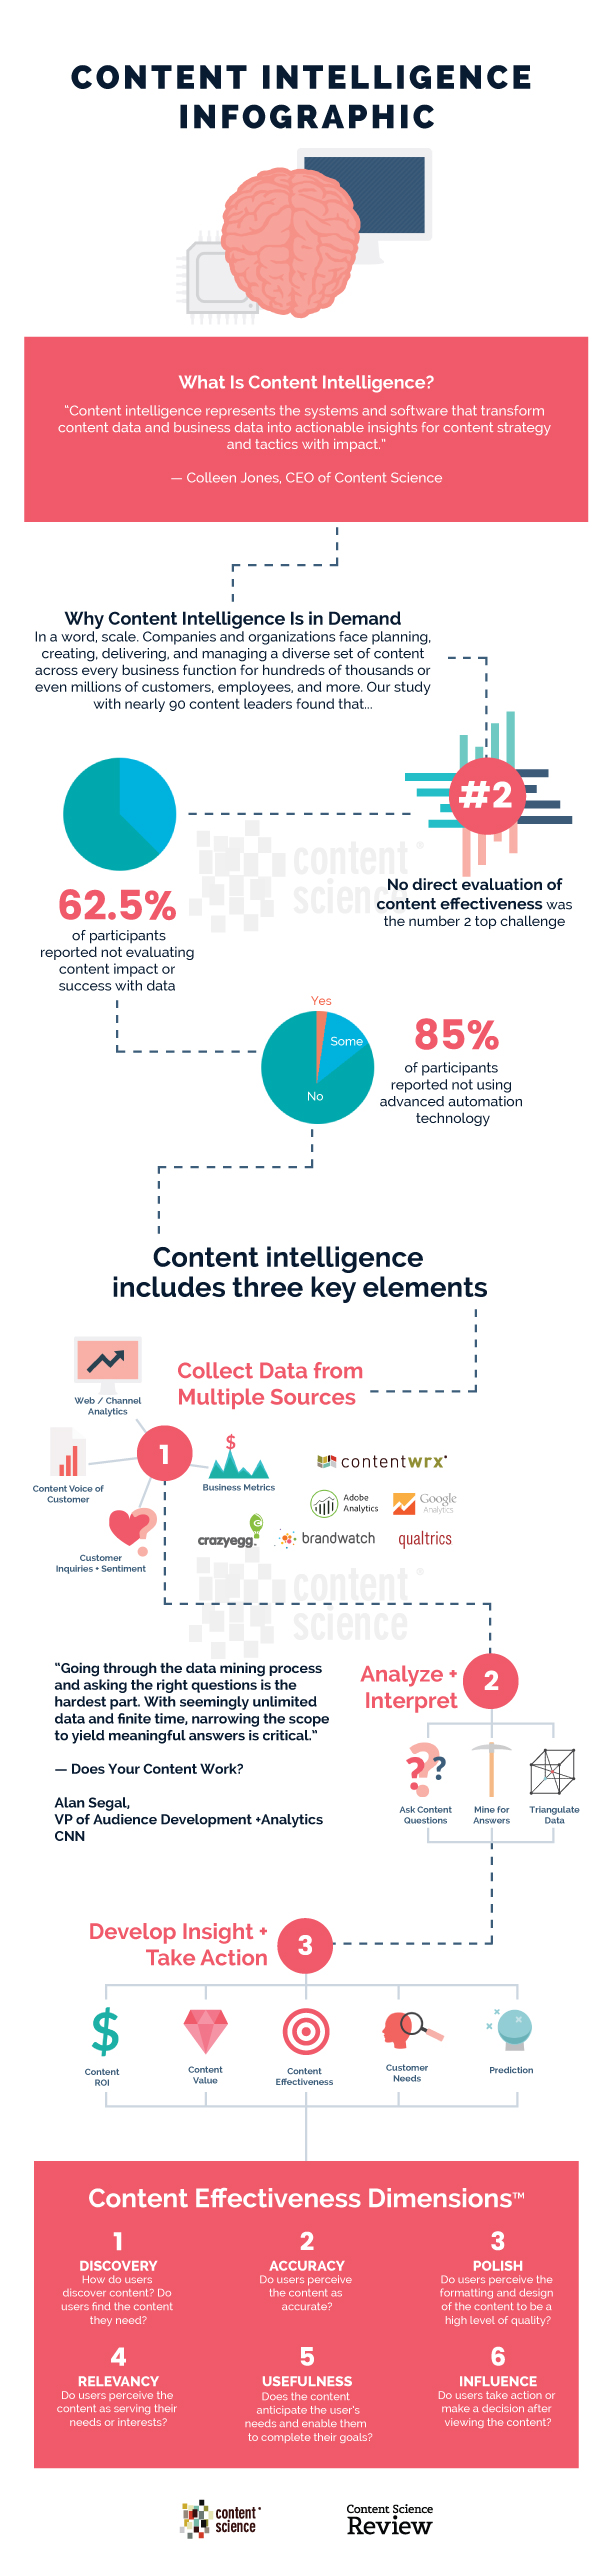 content intelligence infographic